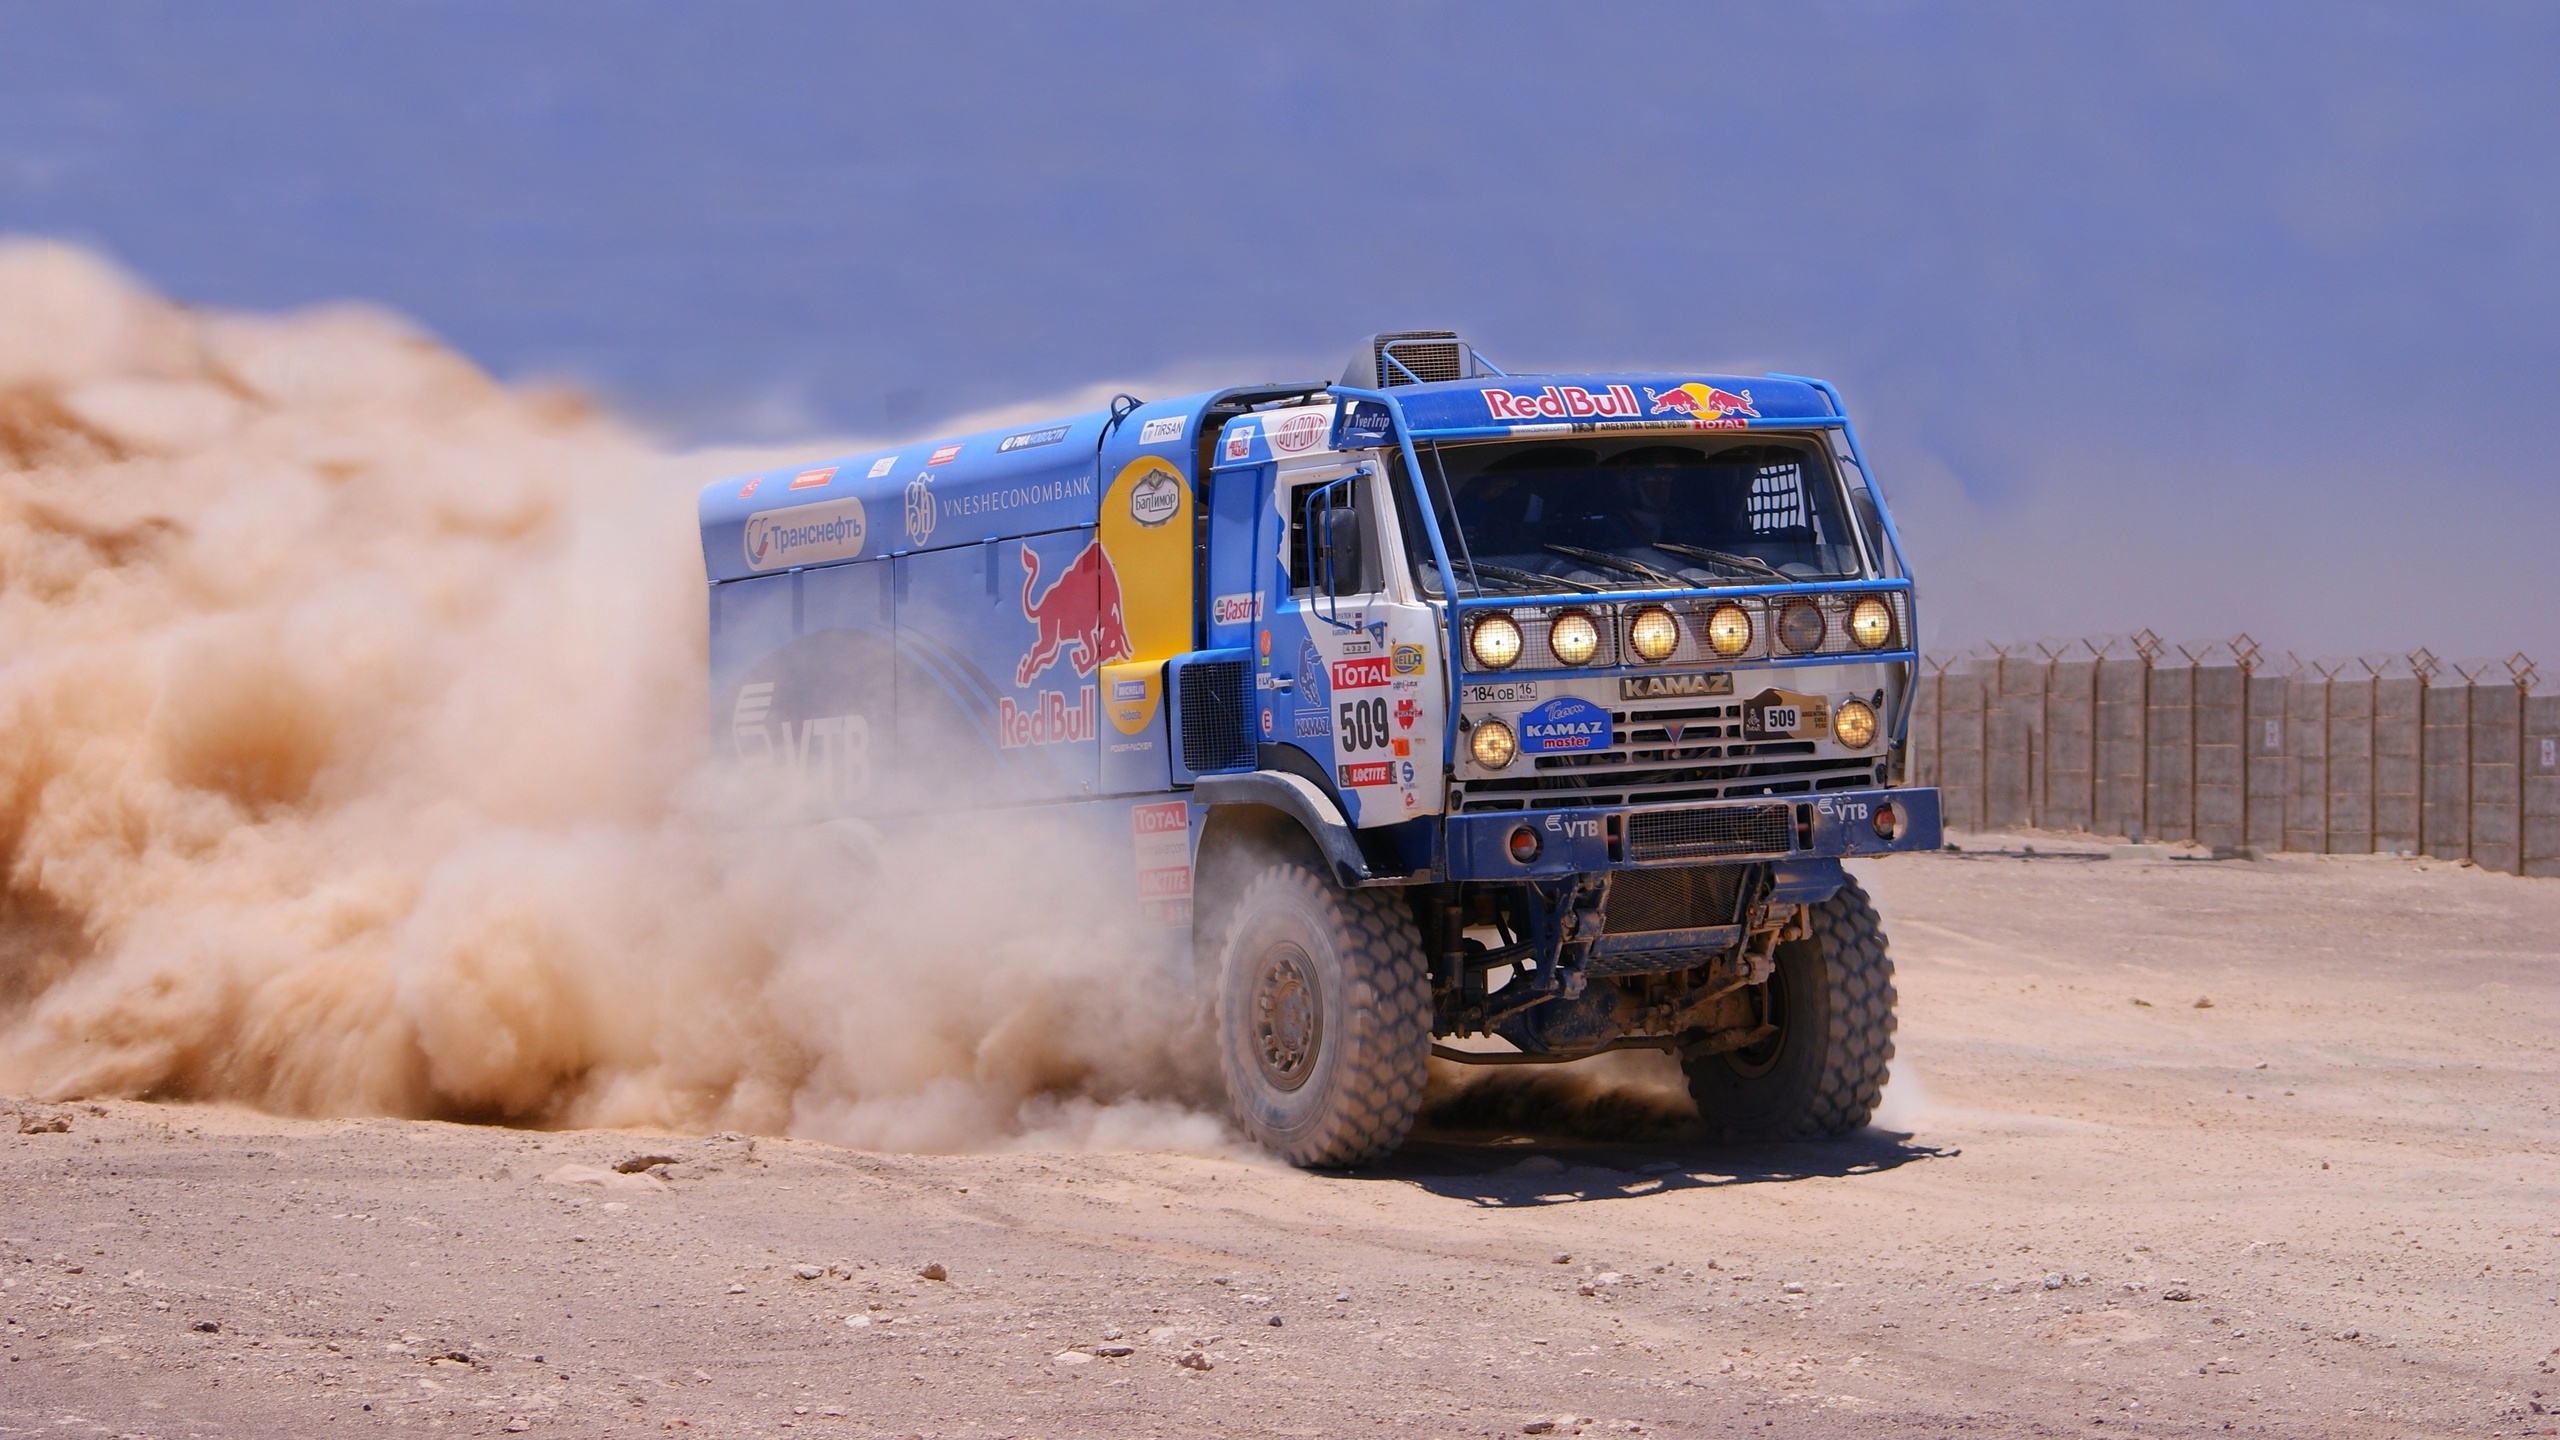 Blue and Yellow Truck on Dirt Road. Wallpaper in 2560x1440 Resolution